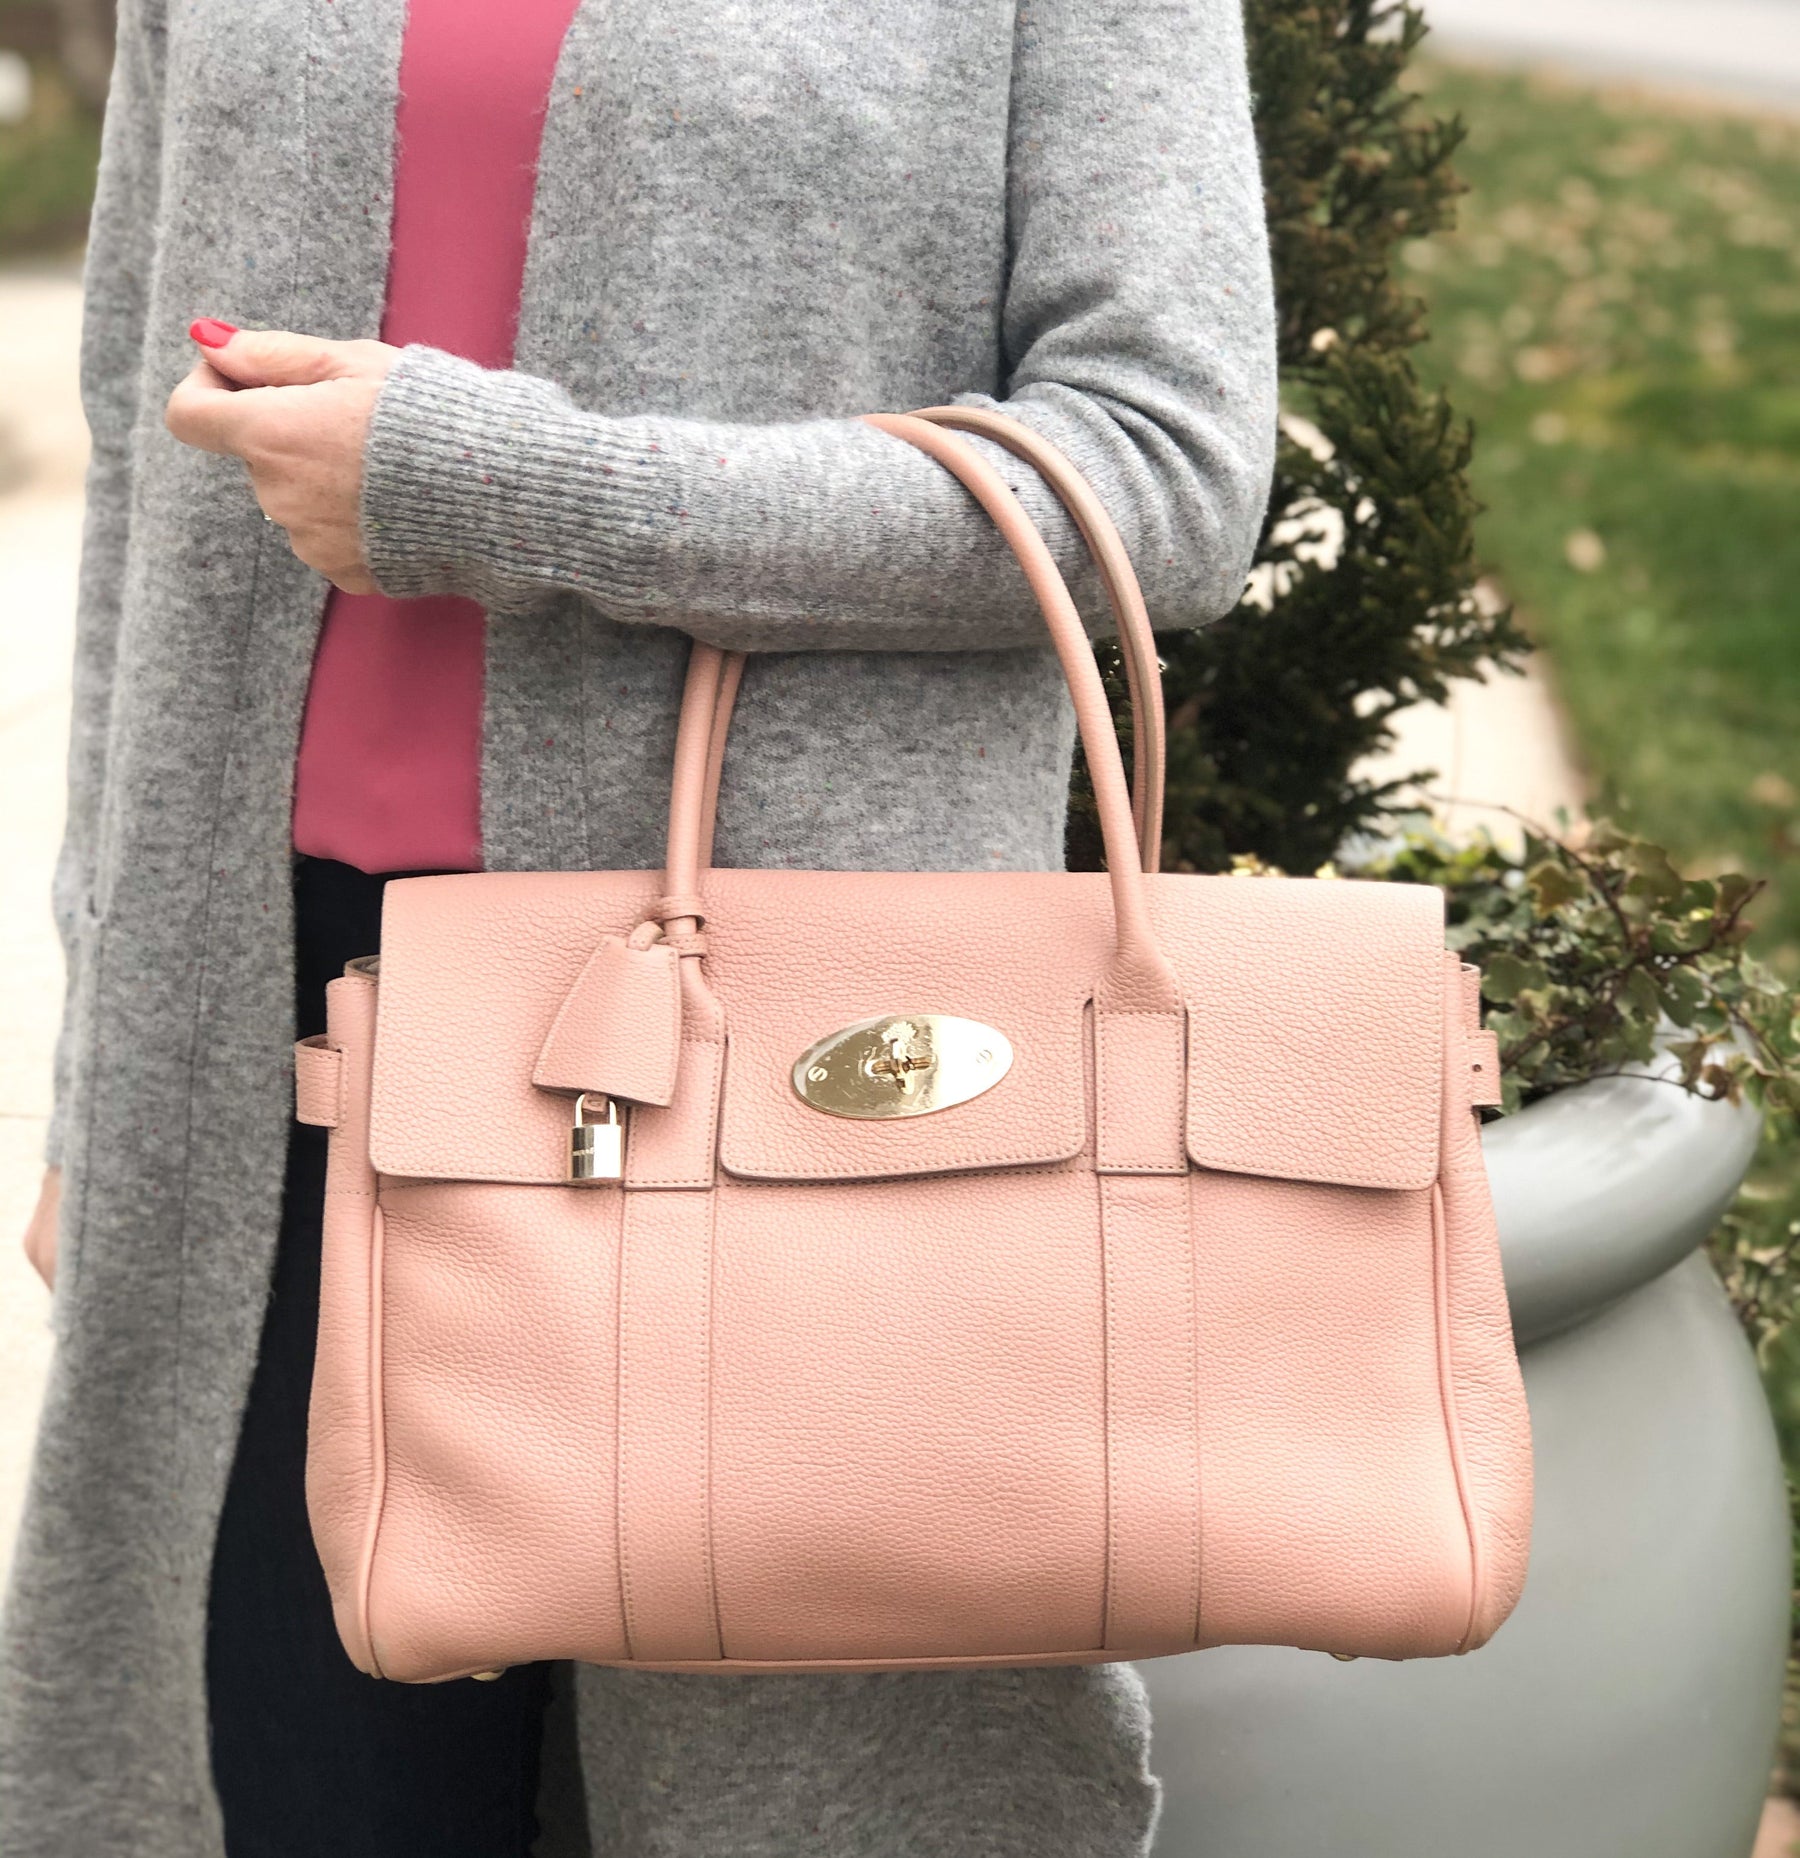 Mulberry Bayswater Nude Tote Bag